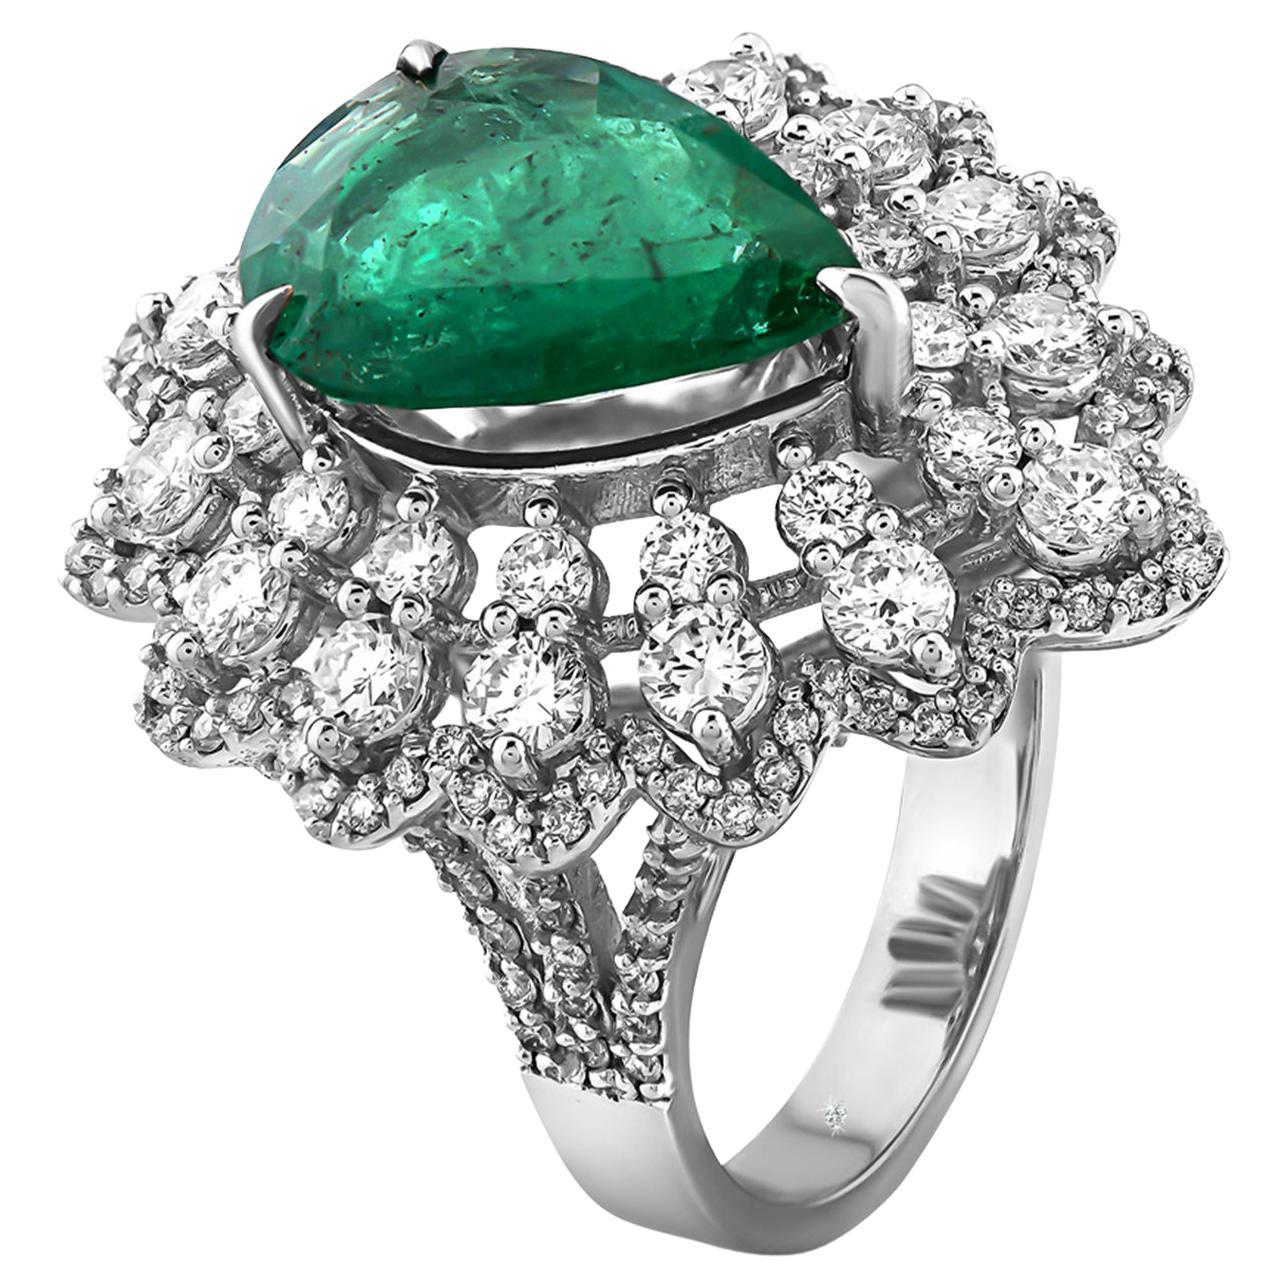 For Sale:  5.82 Carat Pear Shaped Emerald and Diamond Cocktail Ring 18 Karat White Gold